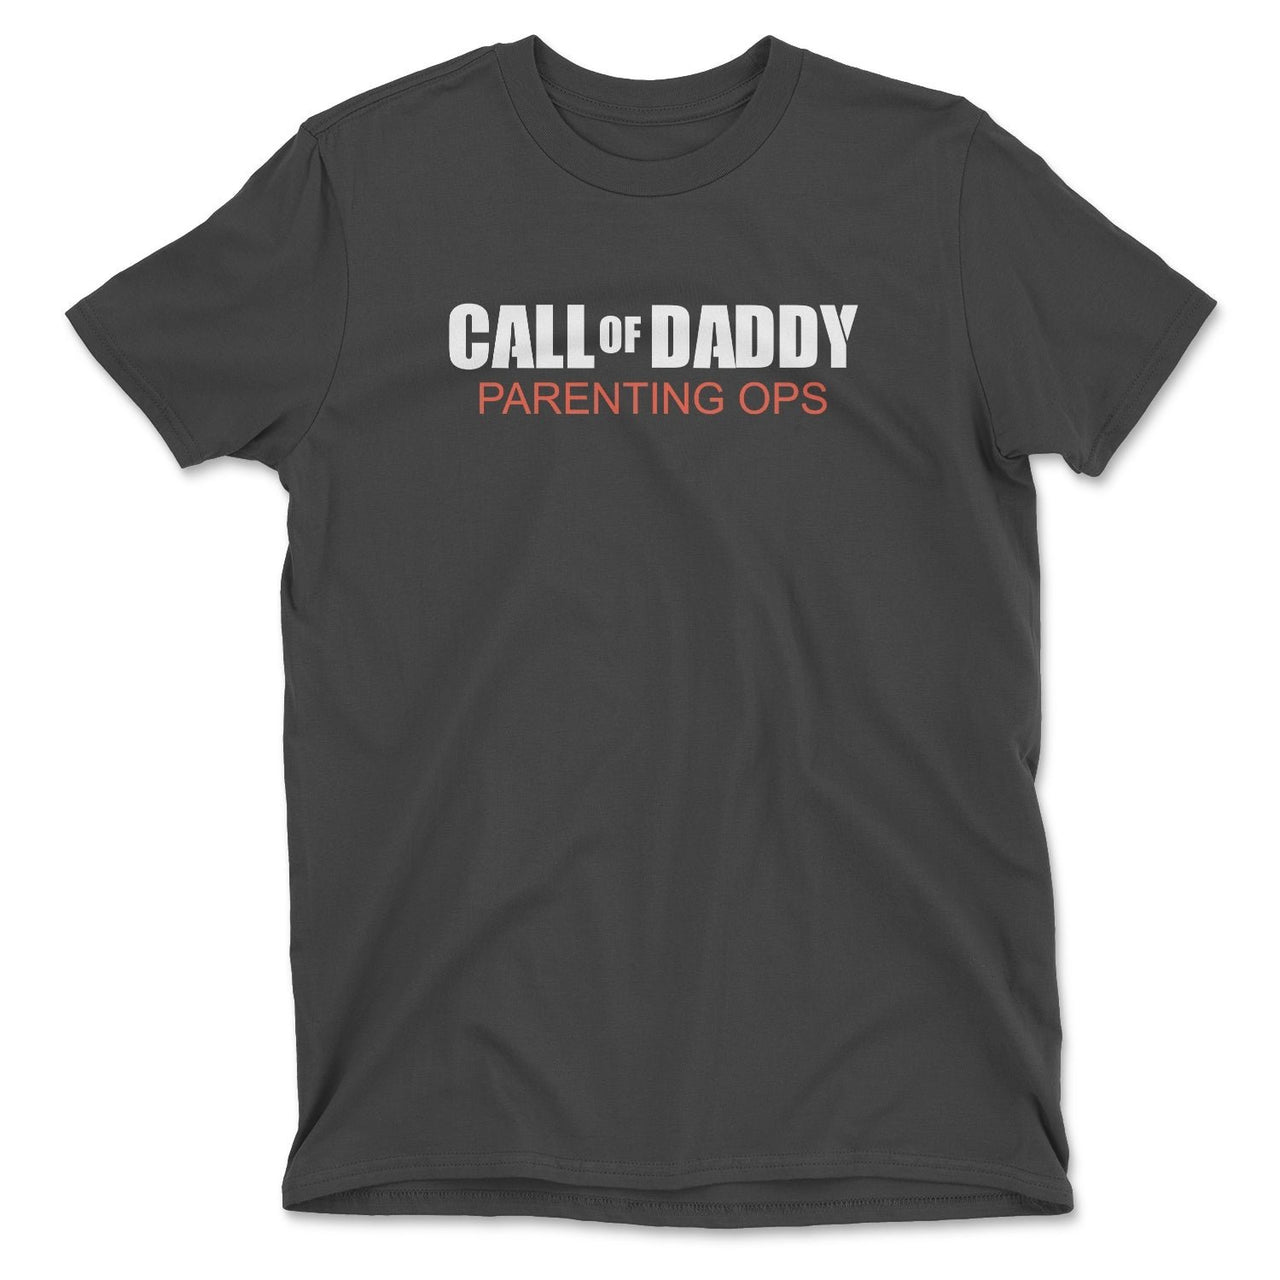 Call OF Daddy Parenting Ops Tee - Mervyns